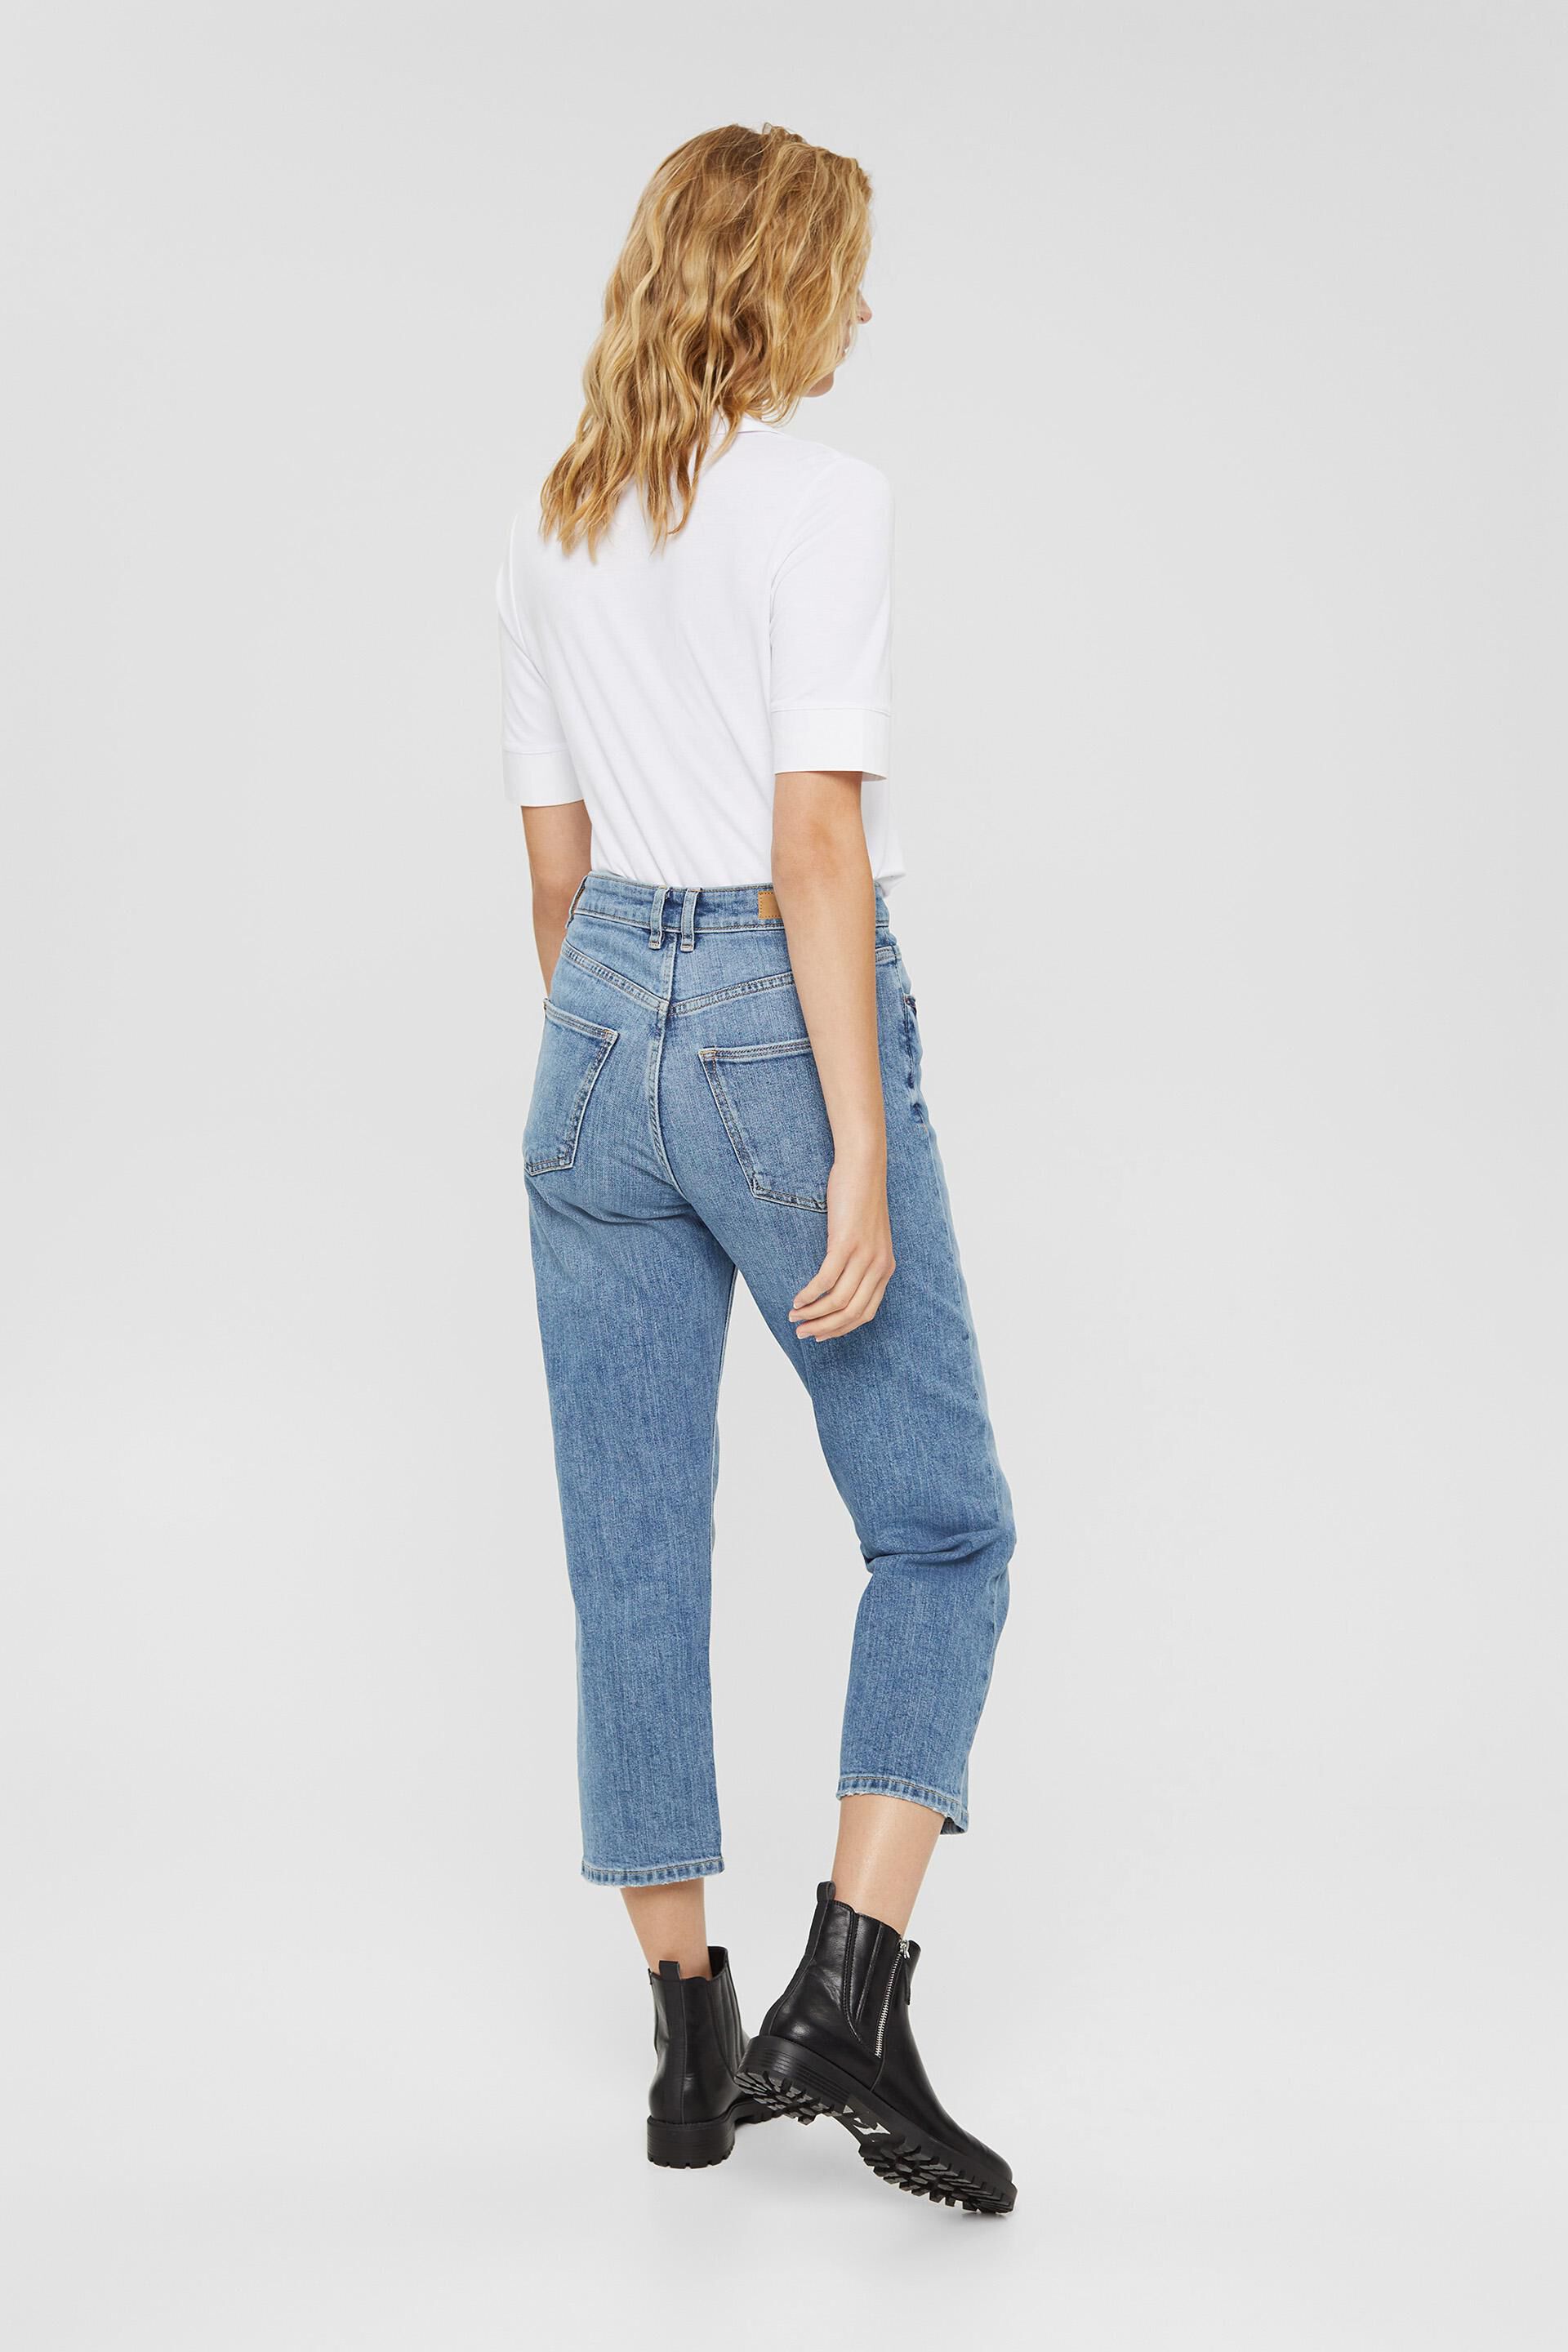 KRISTEN 7\/8 Length Jeans blue washed look Fashion Jeans 7/8 Length Jeans 